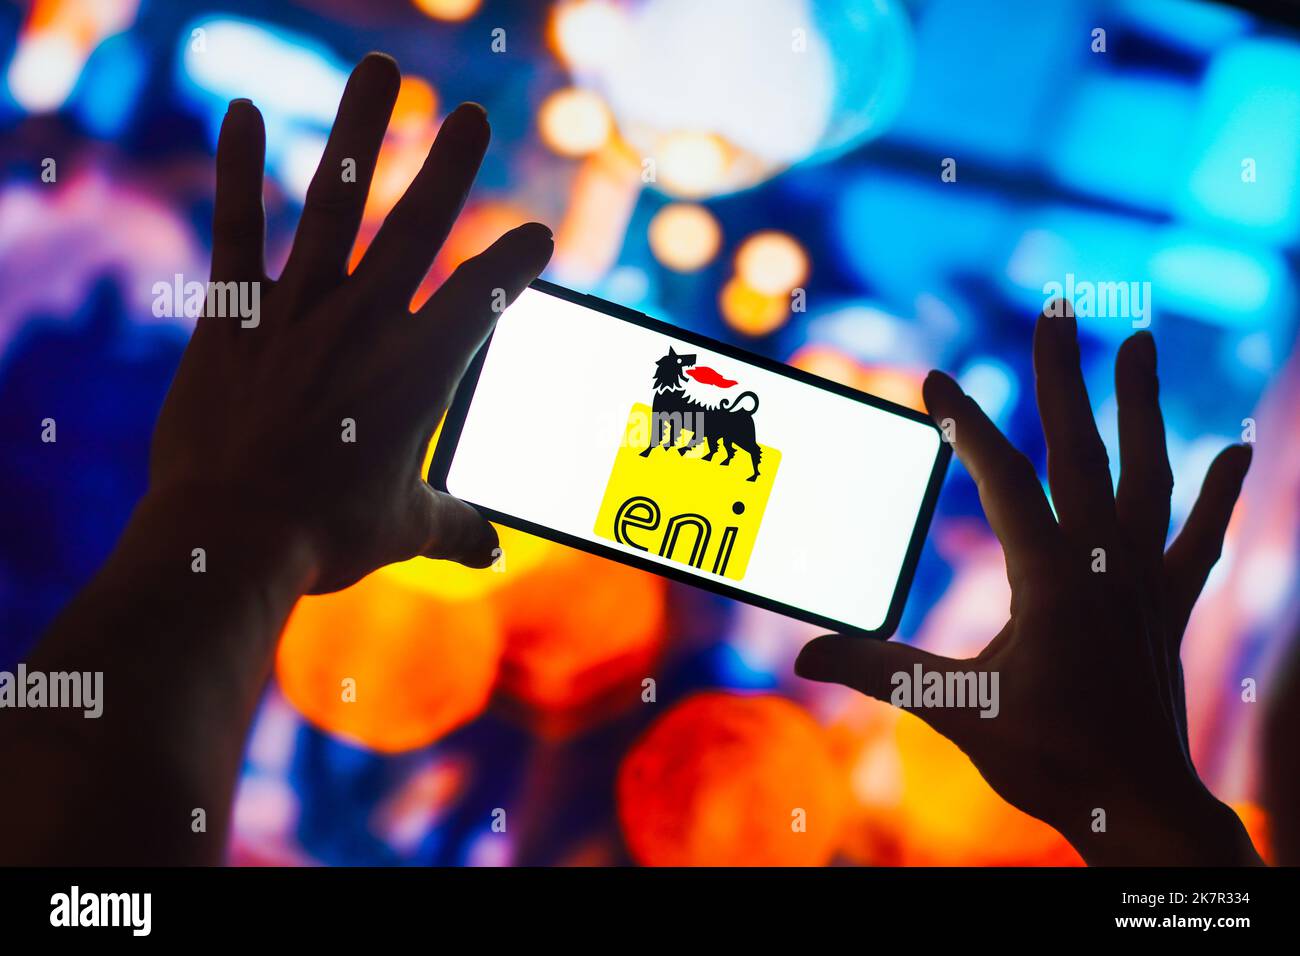 In this photo illustration, the Eni (Ente Nazionale Idrocarburi) logo is displayed on a smartphone screen. Stock Photo